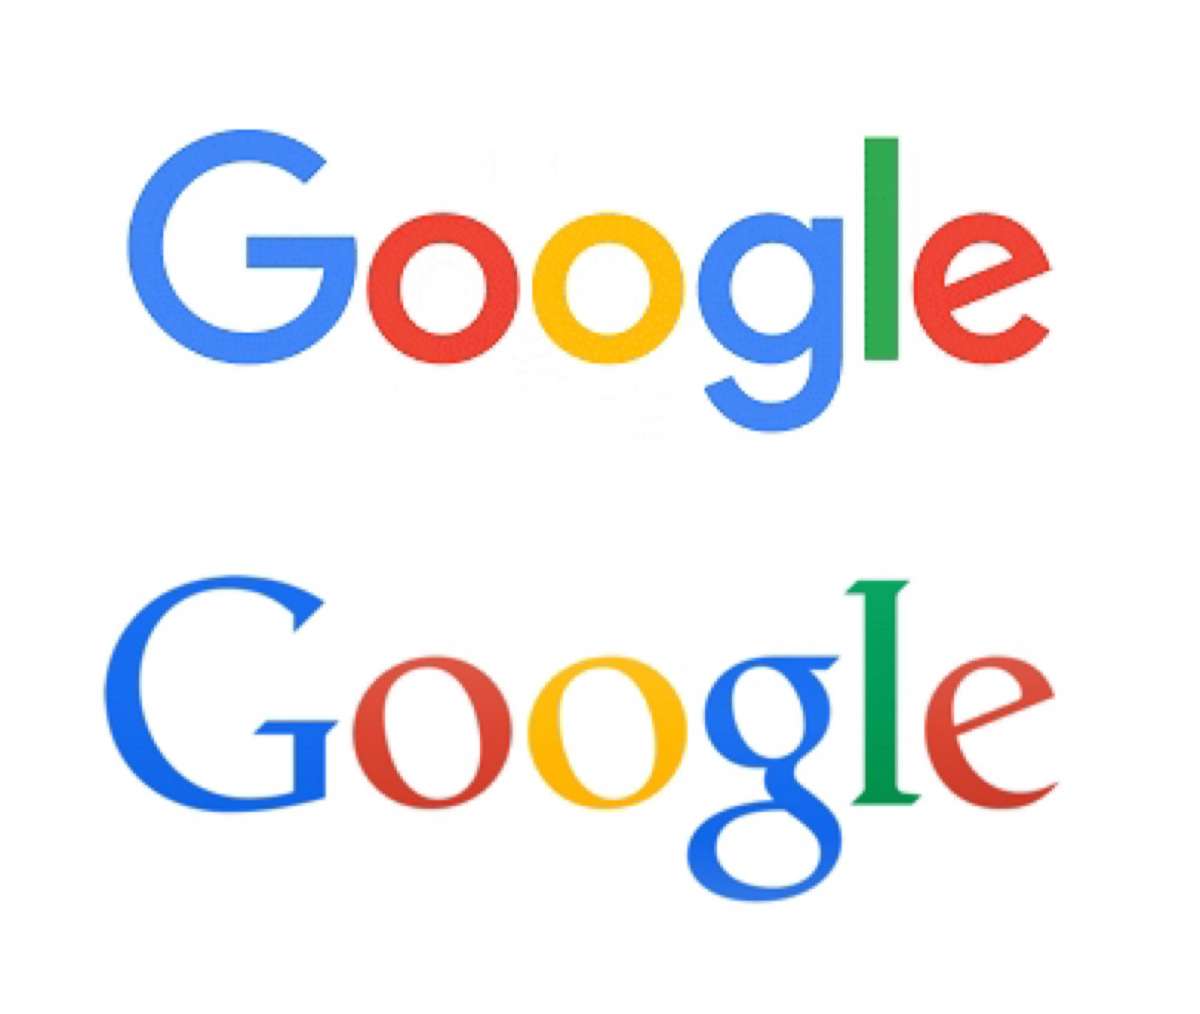 Previous Google Logo - Google's new logo - it's cleaner, rounder and, according to the ...